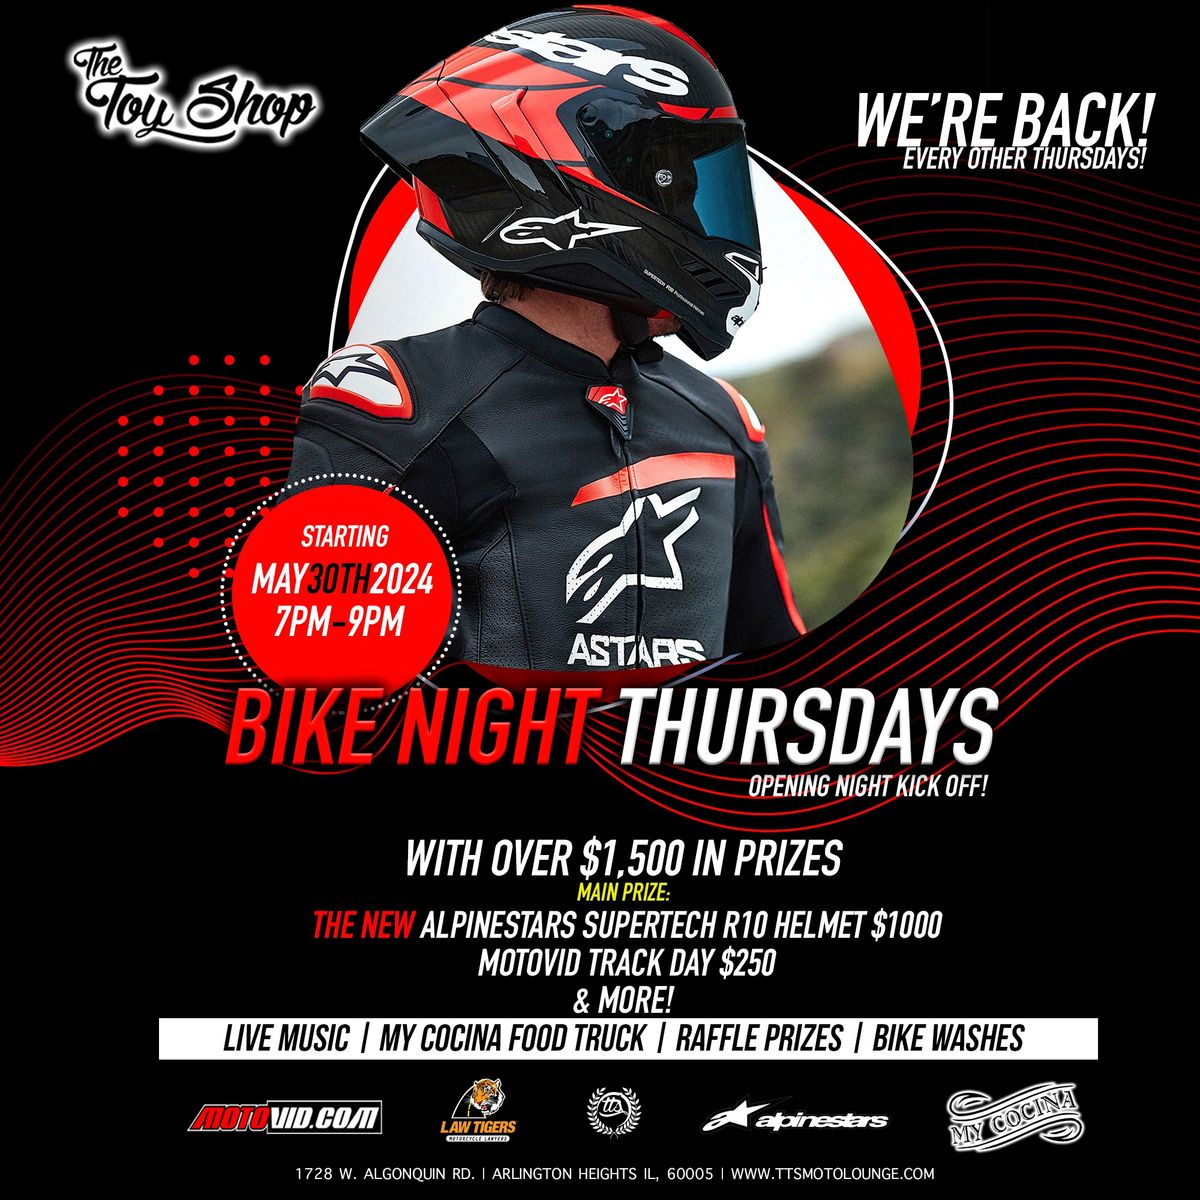 BIKE NIGHT THURSDAYS KICK OFF MAY 30TH 7PM TO 9PM AT THE TOY SHOP!  | $1500 IN PRIZES 